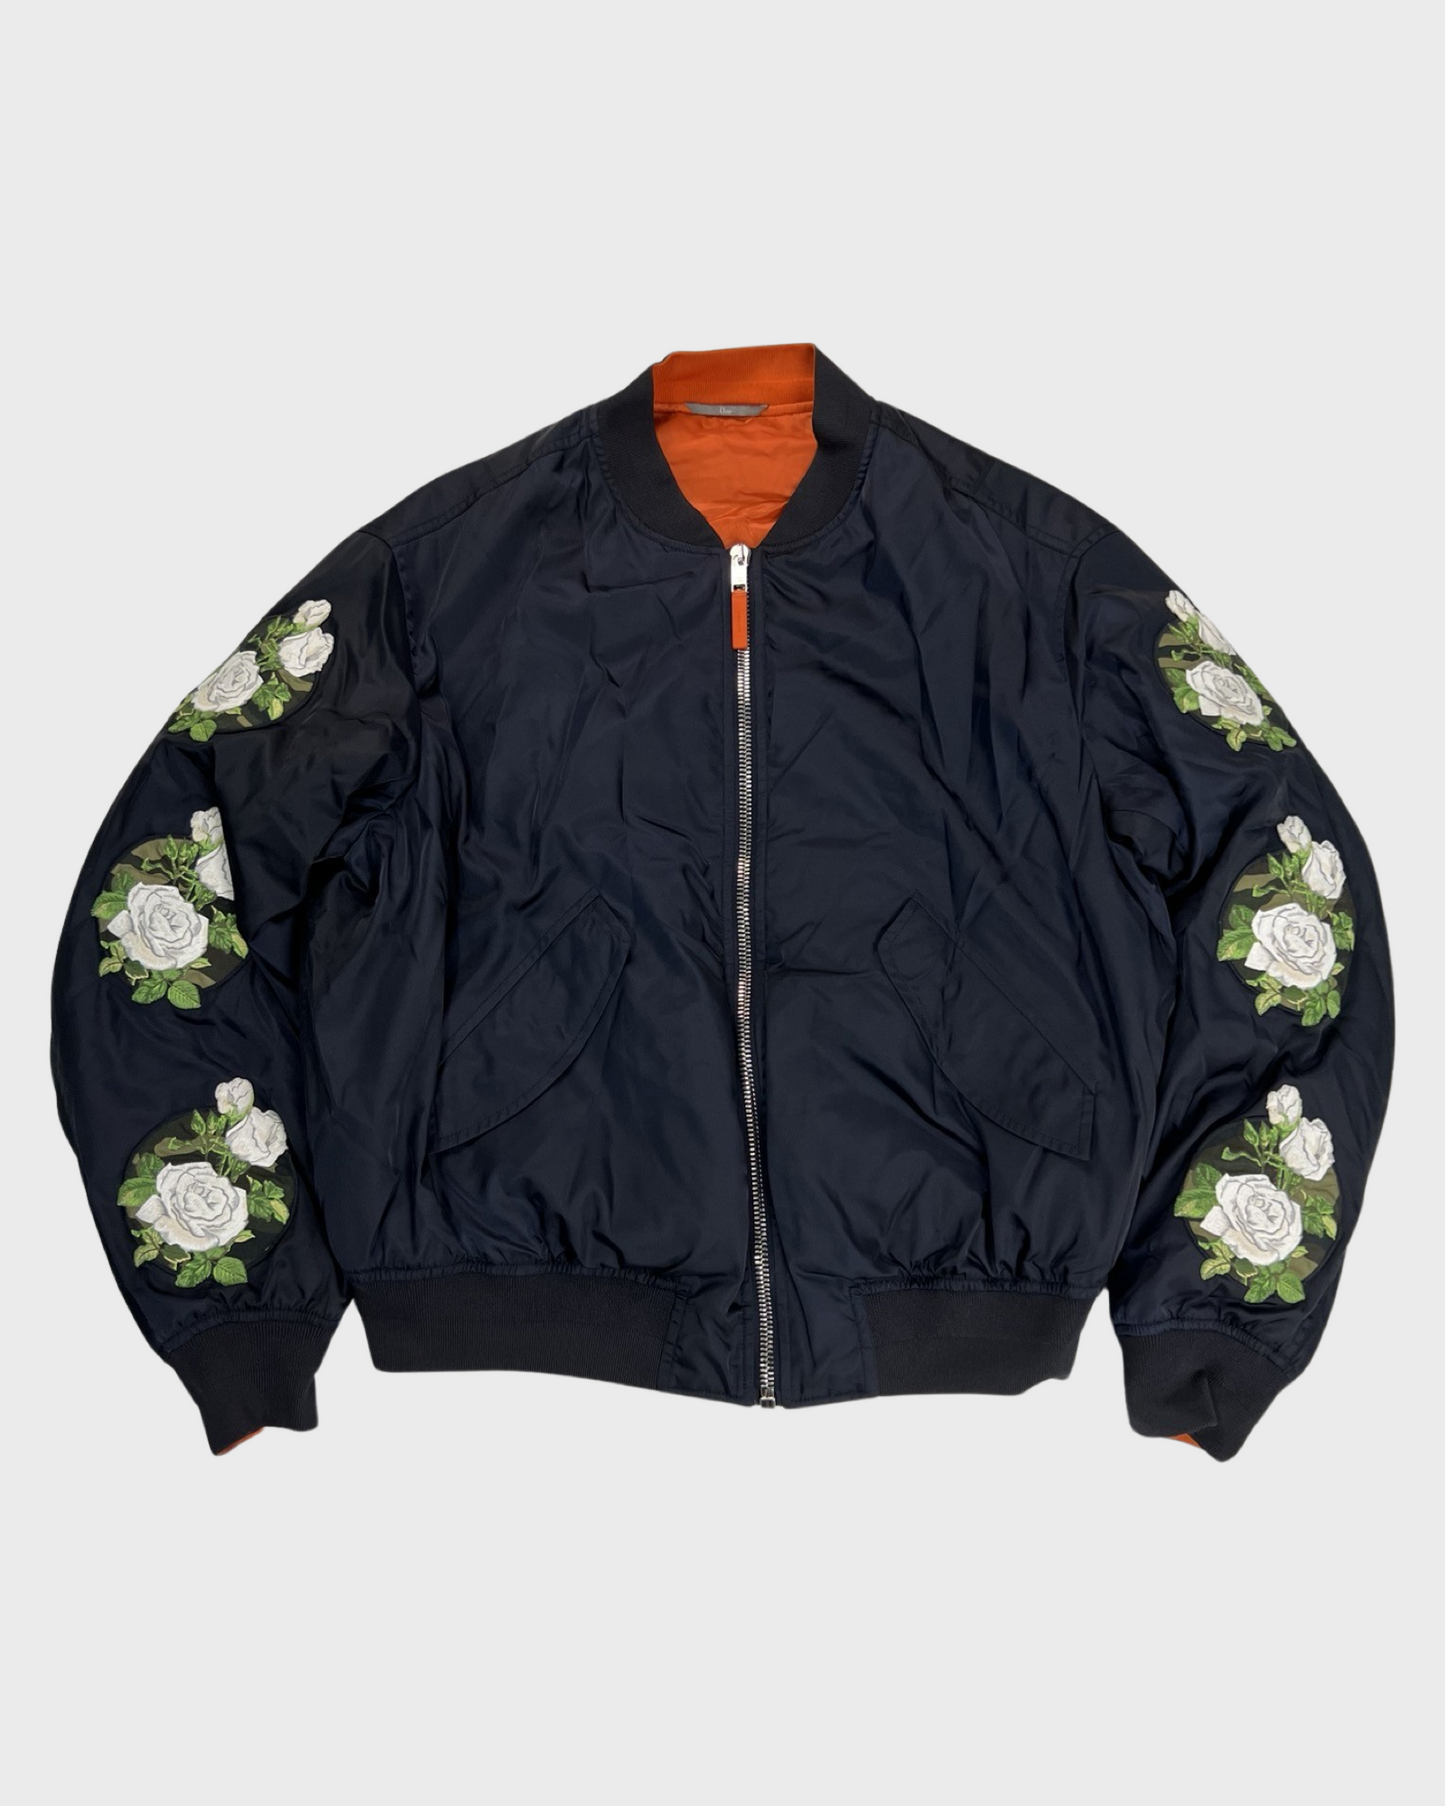 Dior homme SS16 floral embroidered rose patch MA1 bomber Jacket SZ:50